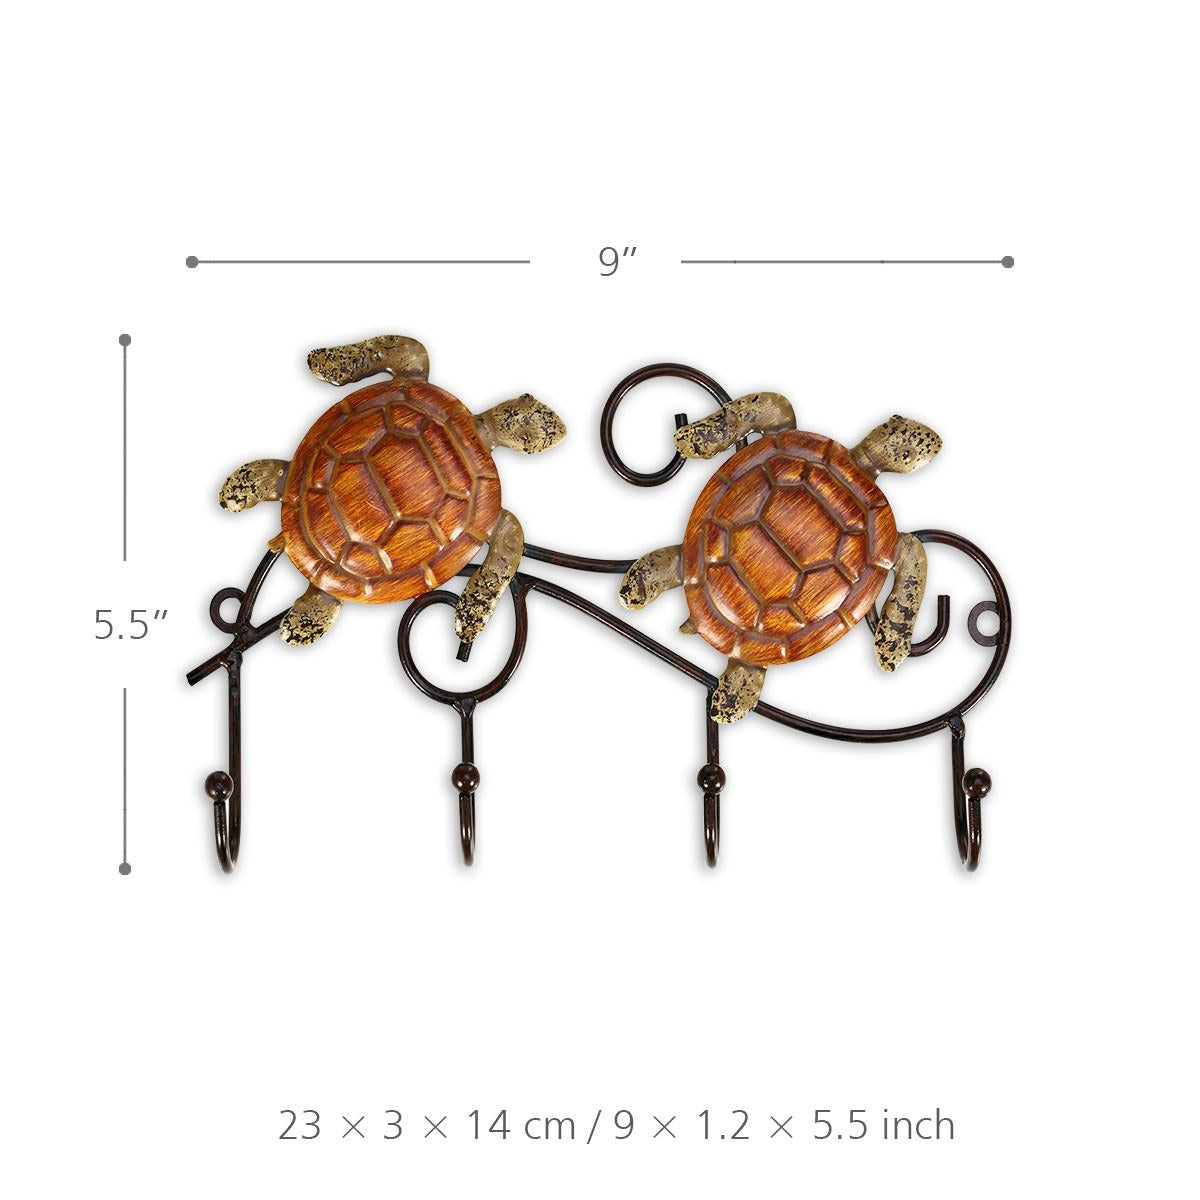 Say hello to your new favorite piece of turtle wall hook!